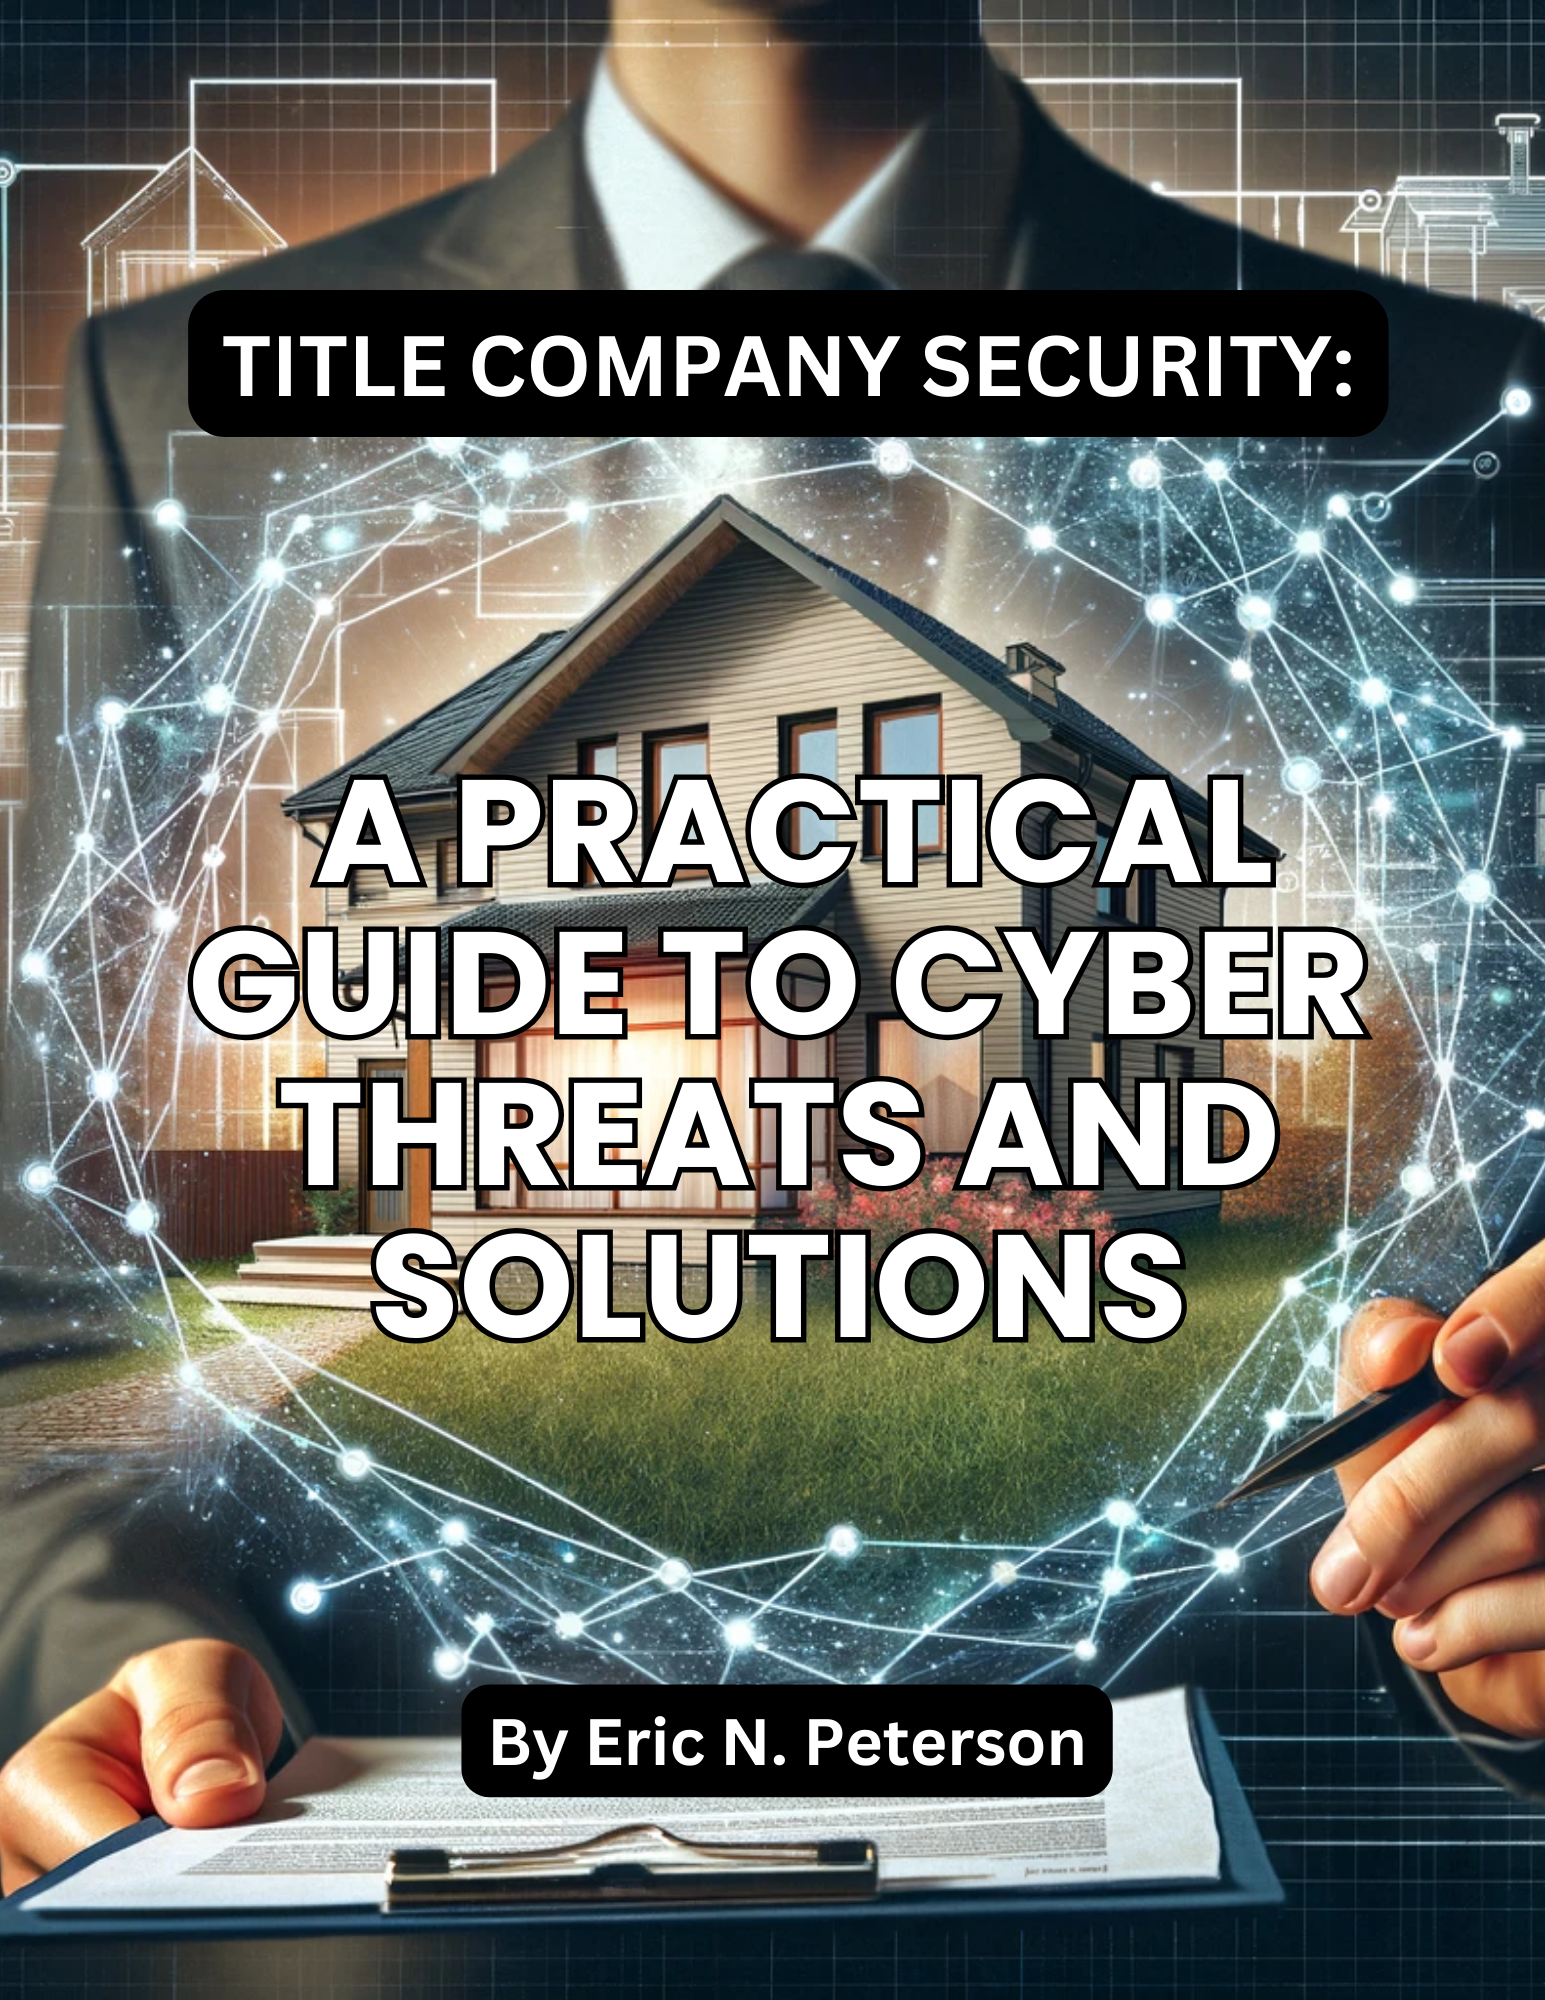 Title Company Security: A Practical Guide to Cyber Threats and Solutions Cover Pic